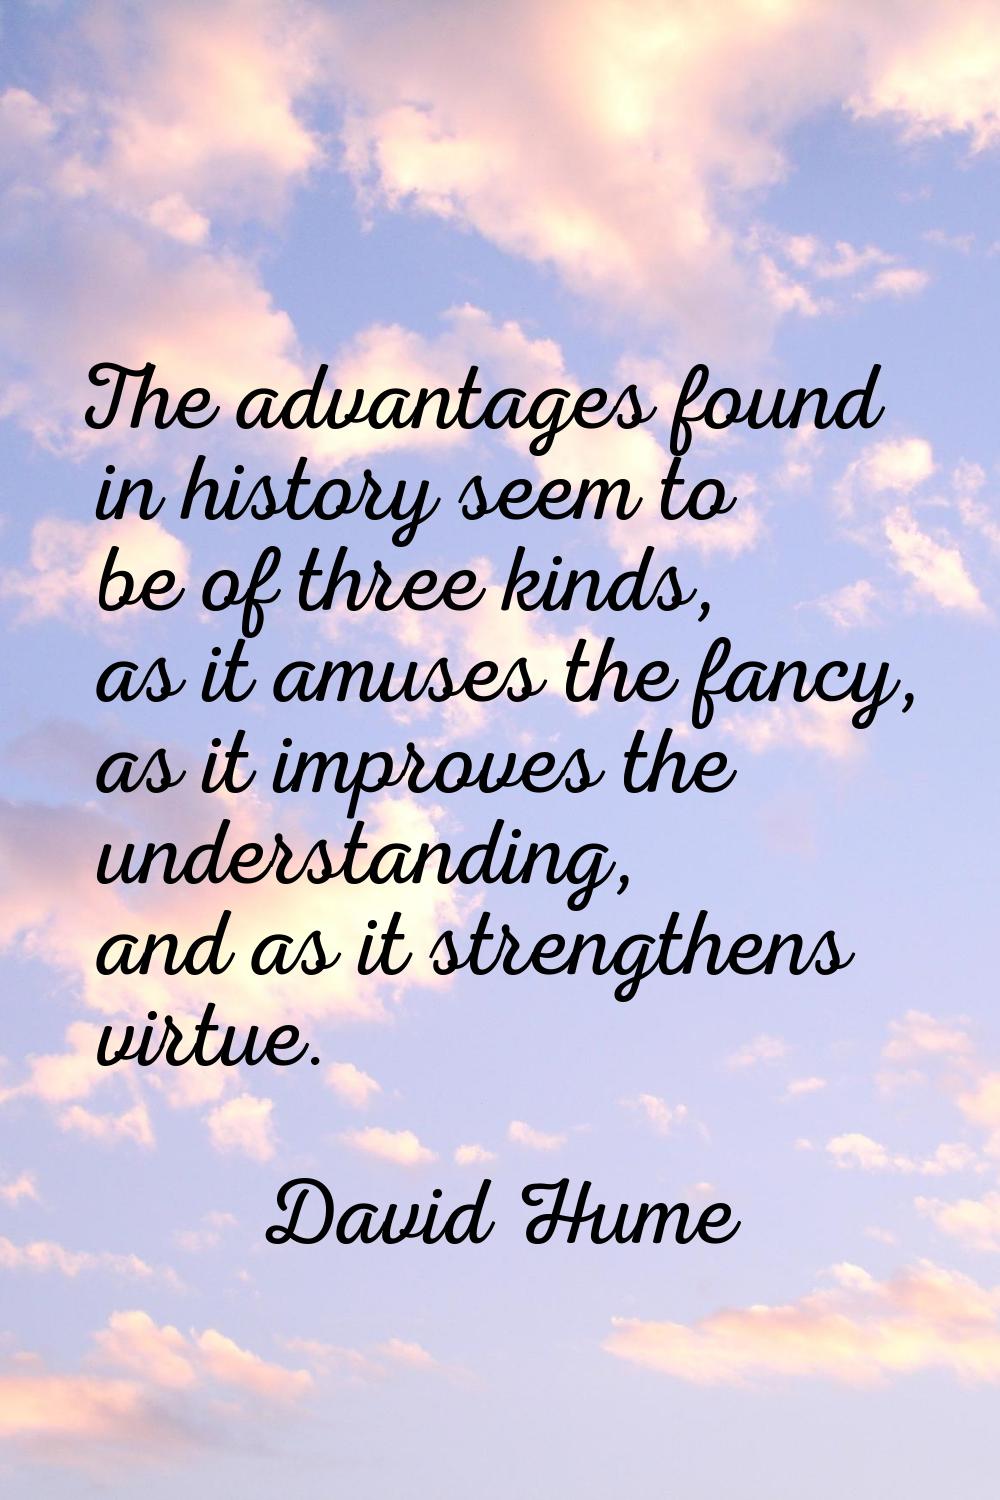 The advantages found in history seem to be of three kinds, as it amuses the fancy, as it improves t